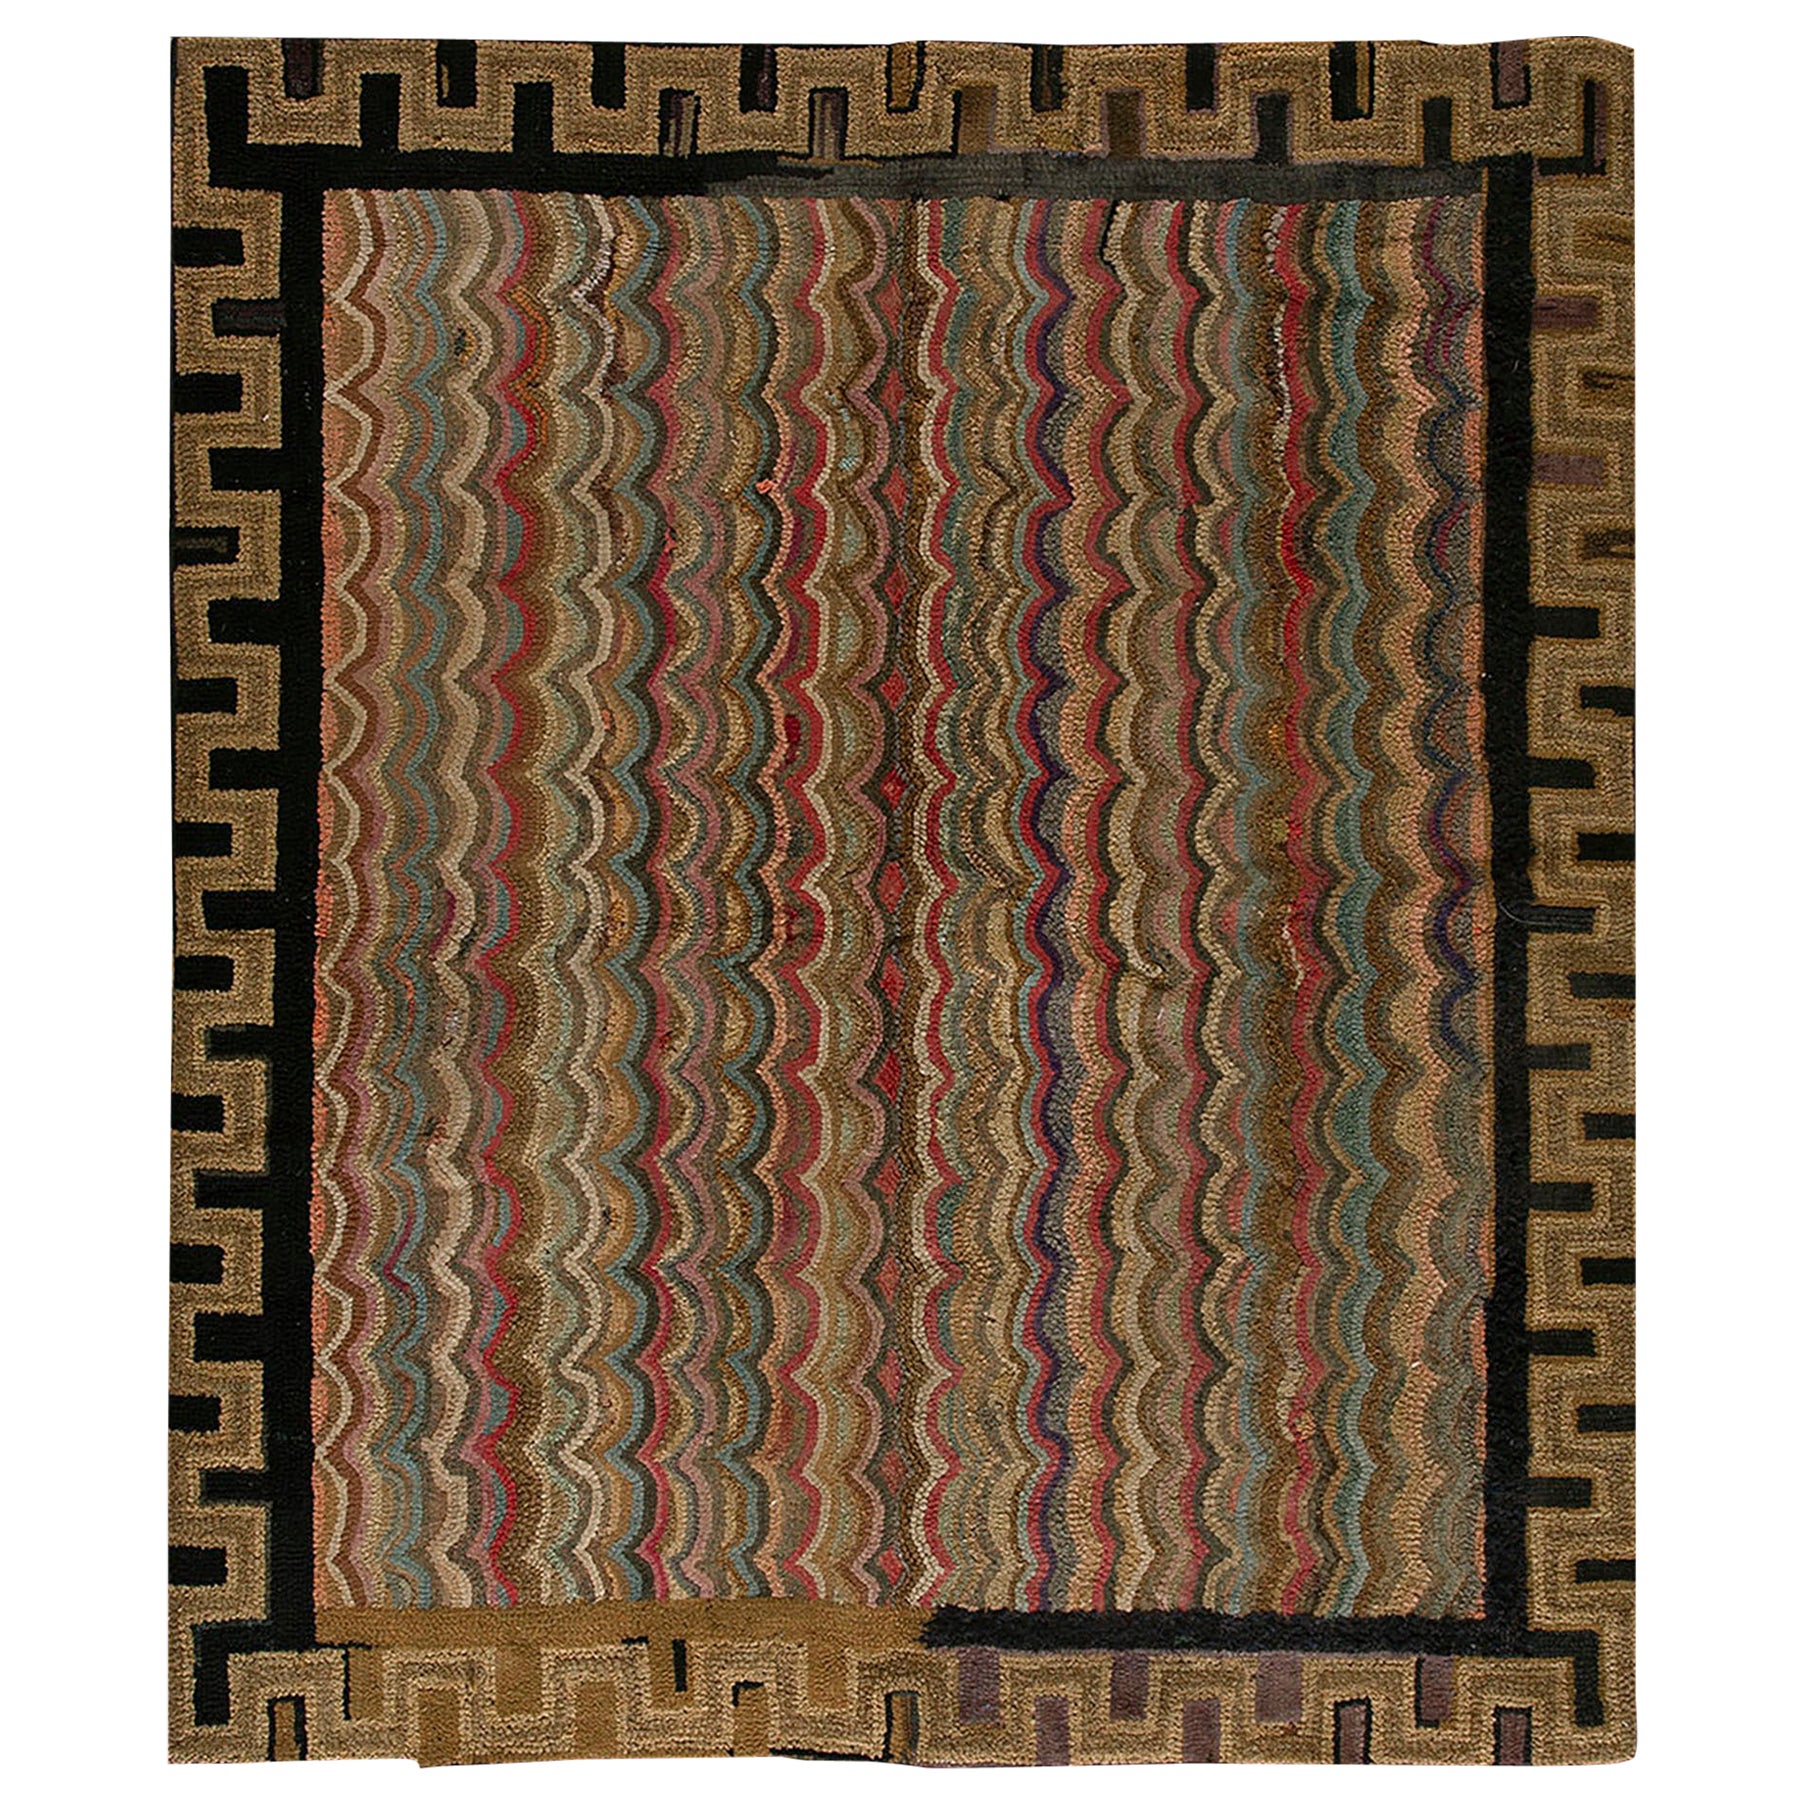 Antique American Hooked Rug 4'2"x4'10"